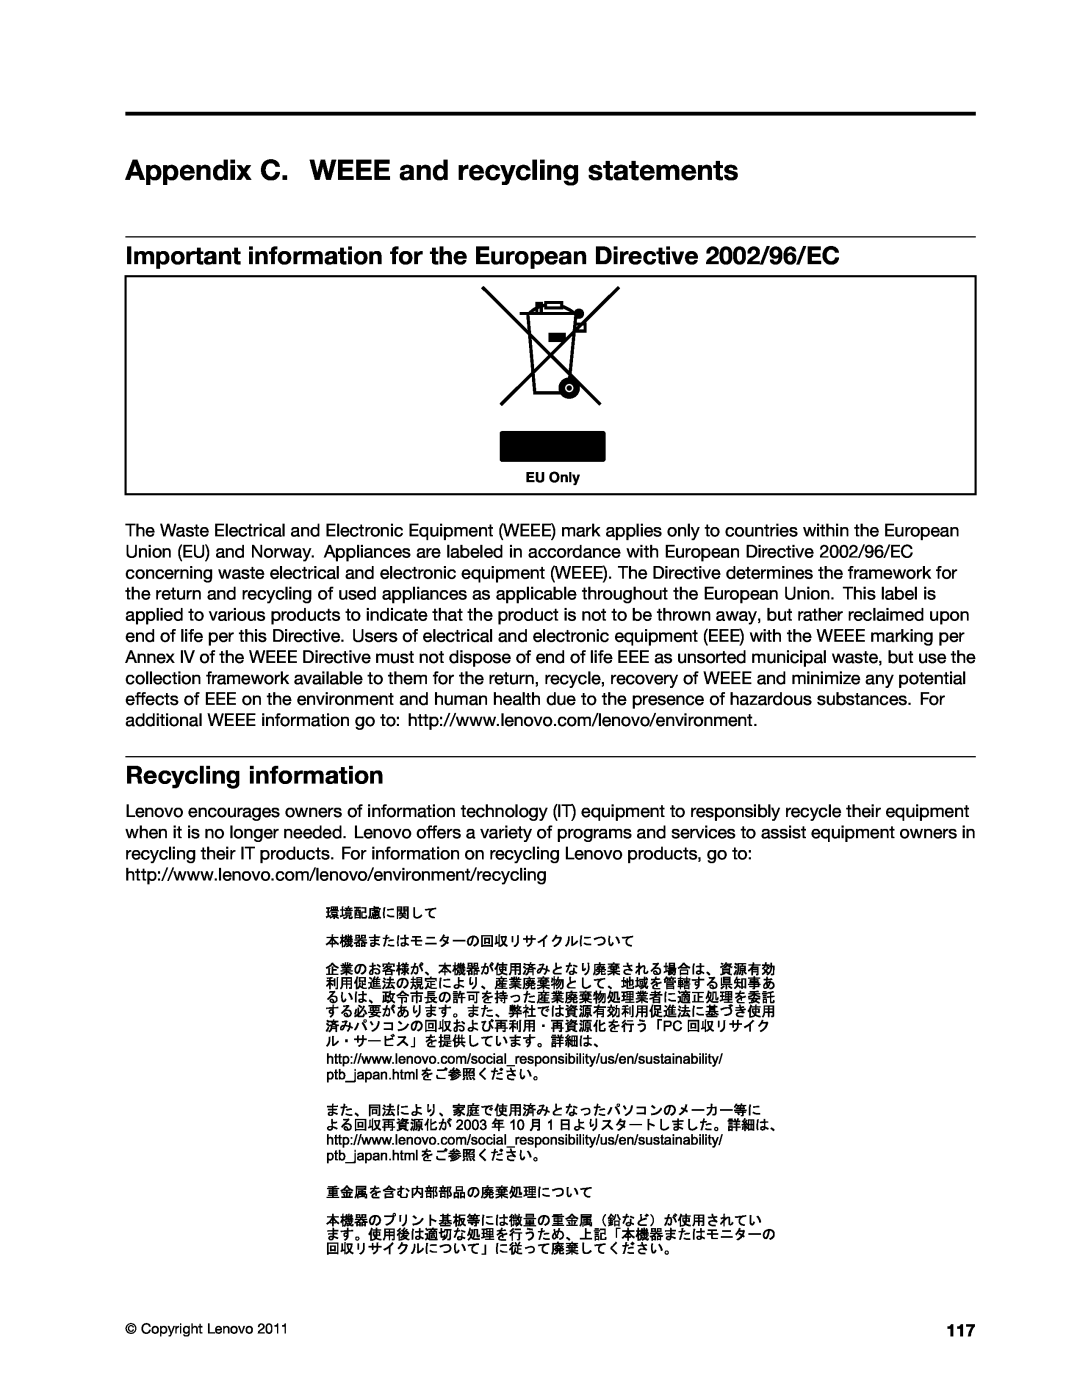 Lenovo 3140, 7339 Appendix C. WEEE and recycling statements, Important information for the European Directive 2002/96/EC 